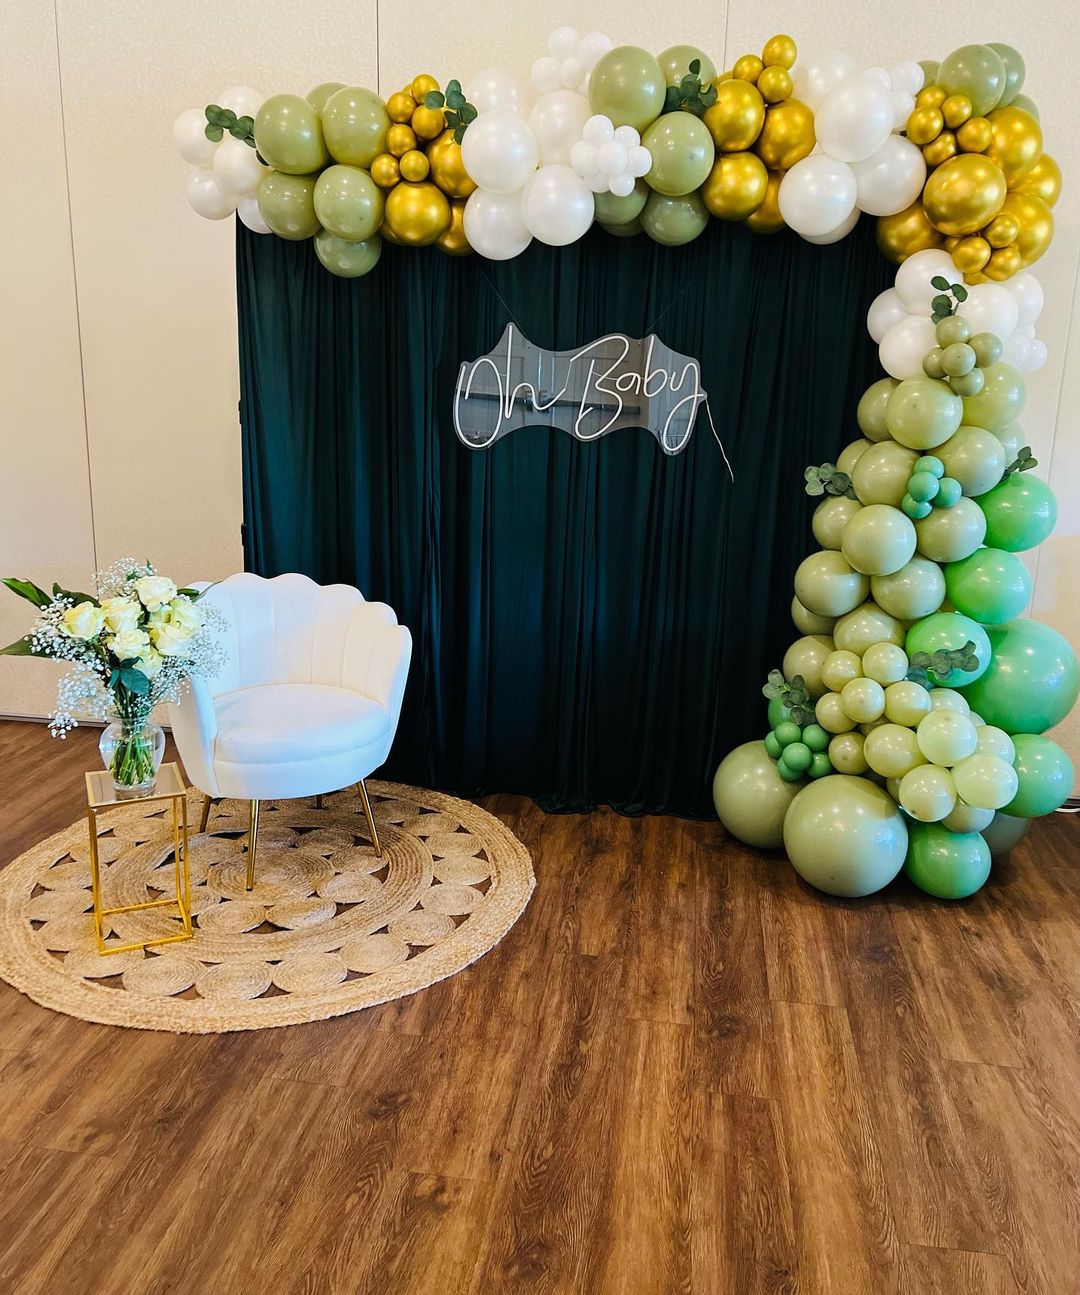 Green balloons surround a curtain. Photo by Instagram user @sweetcastles_events.